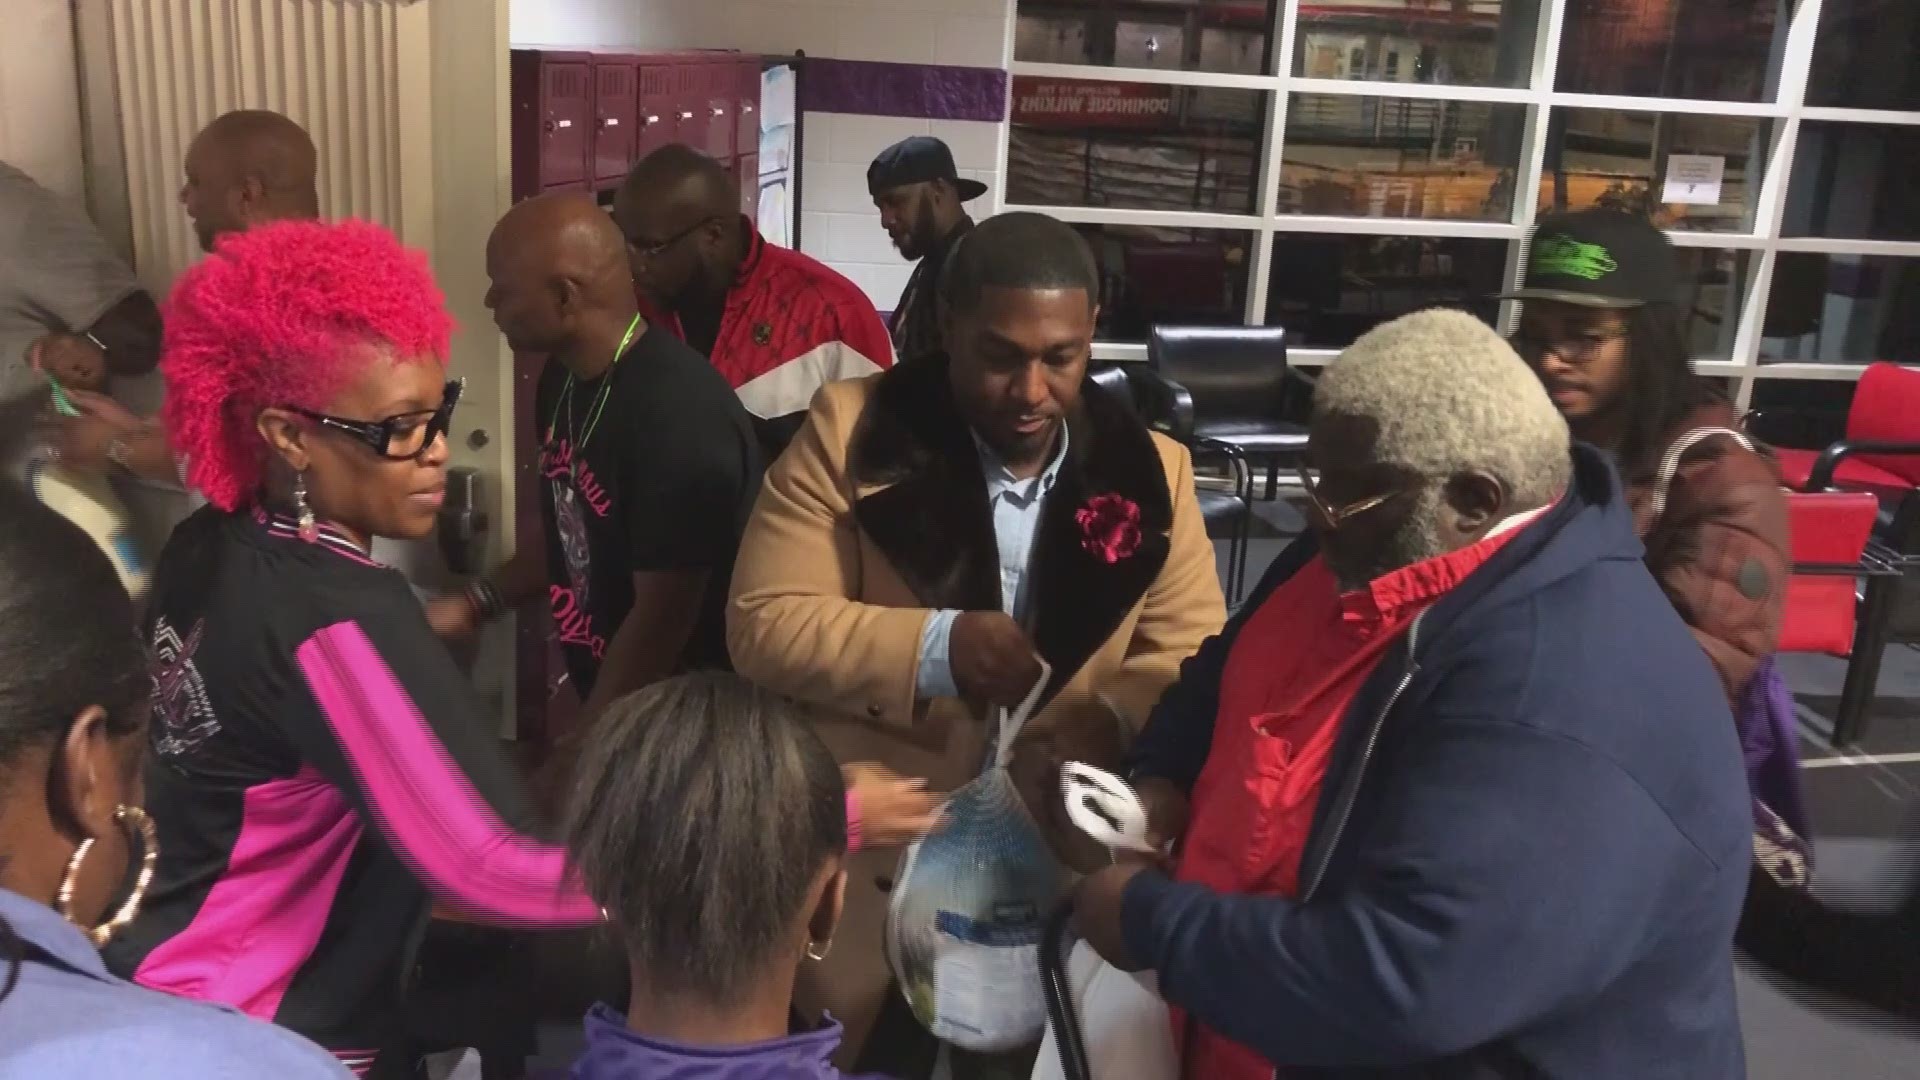 The Tri-Cities hosted two charity events in time for Thanksgiving. The City of East Point with Emerging 100, as well as the Georgia Spartans gave away nearly 1000 turkeys combined to families in need this holiday.